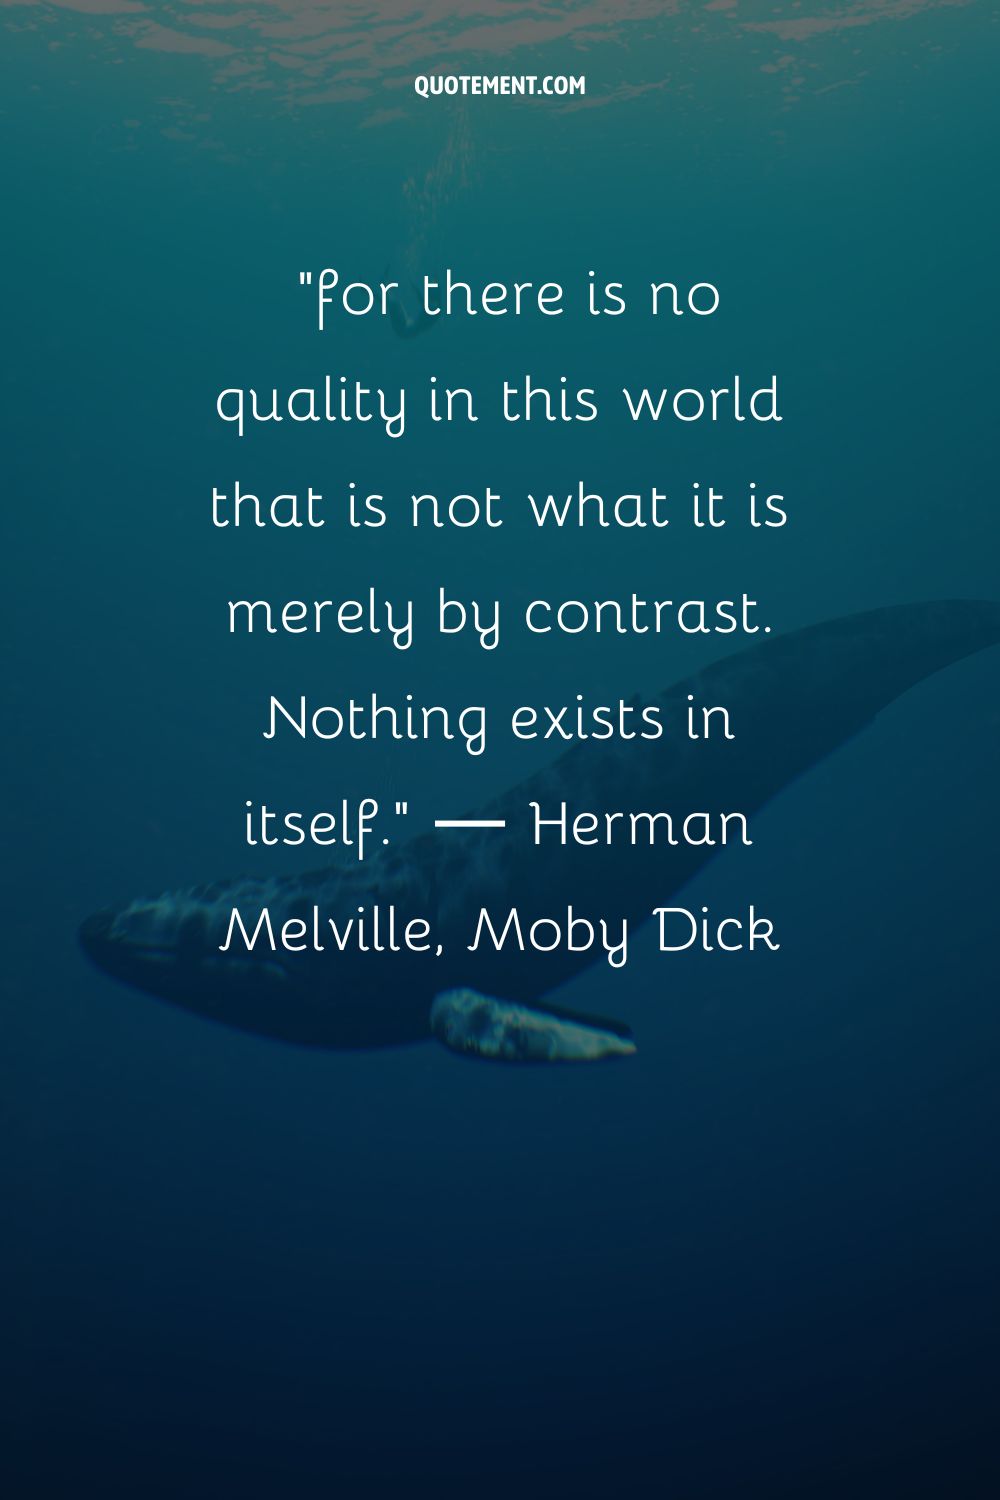 Nothing exists in itself.